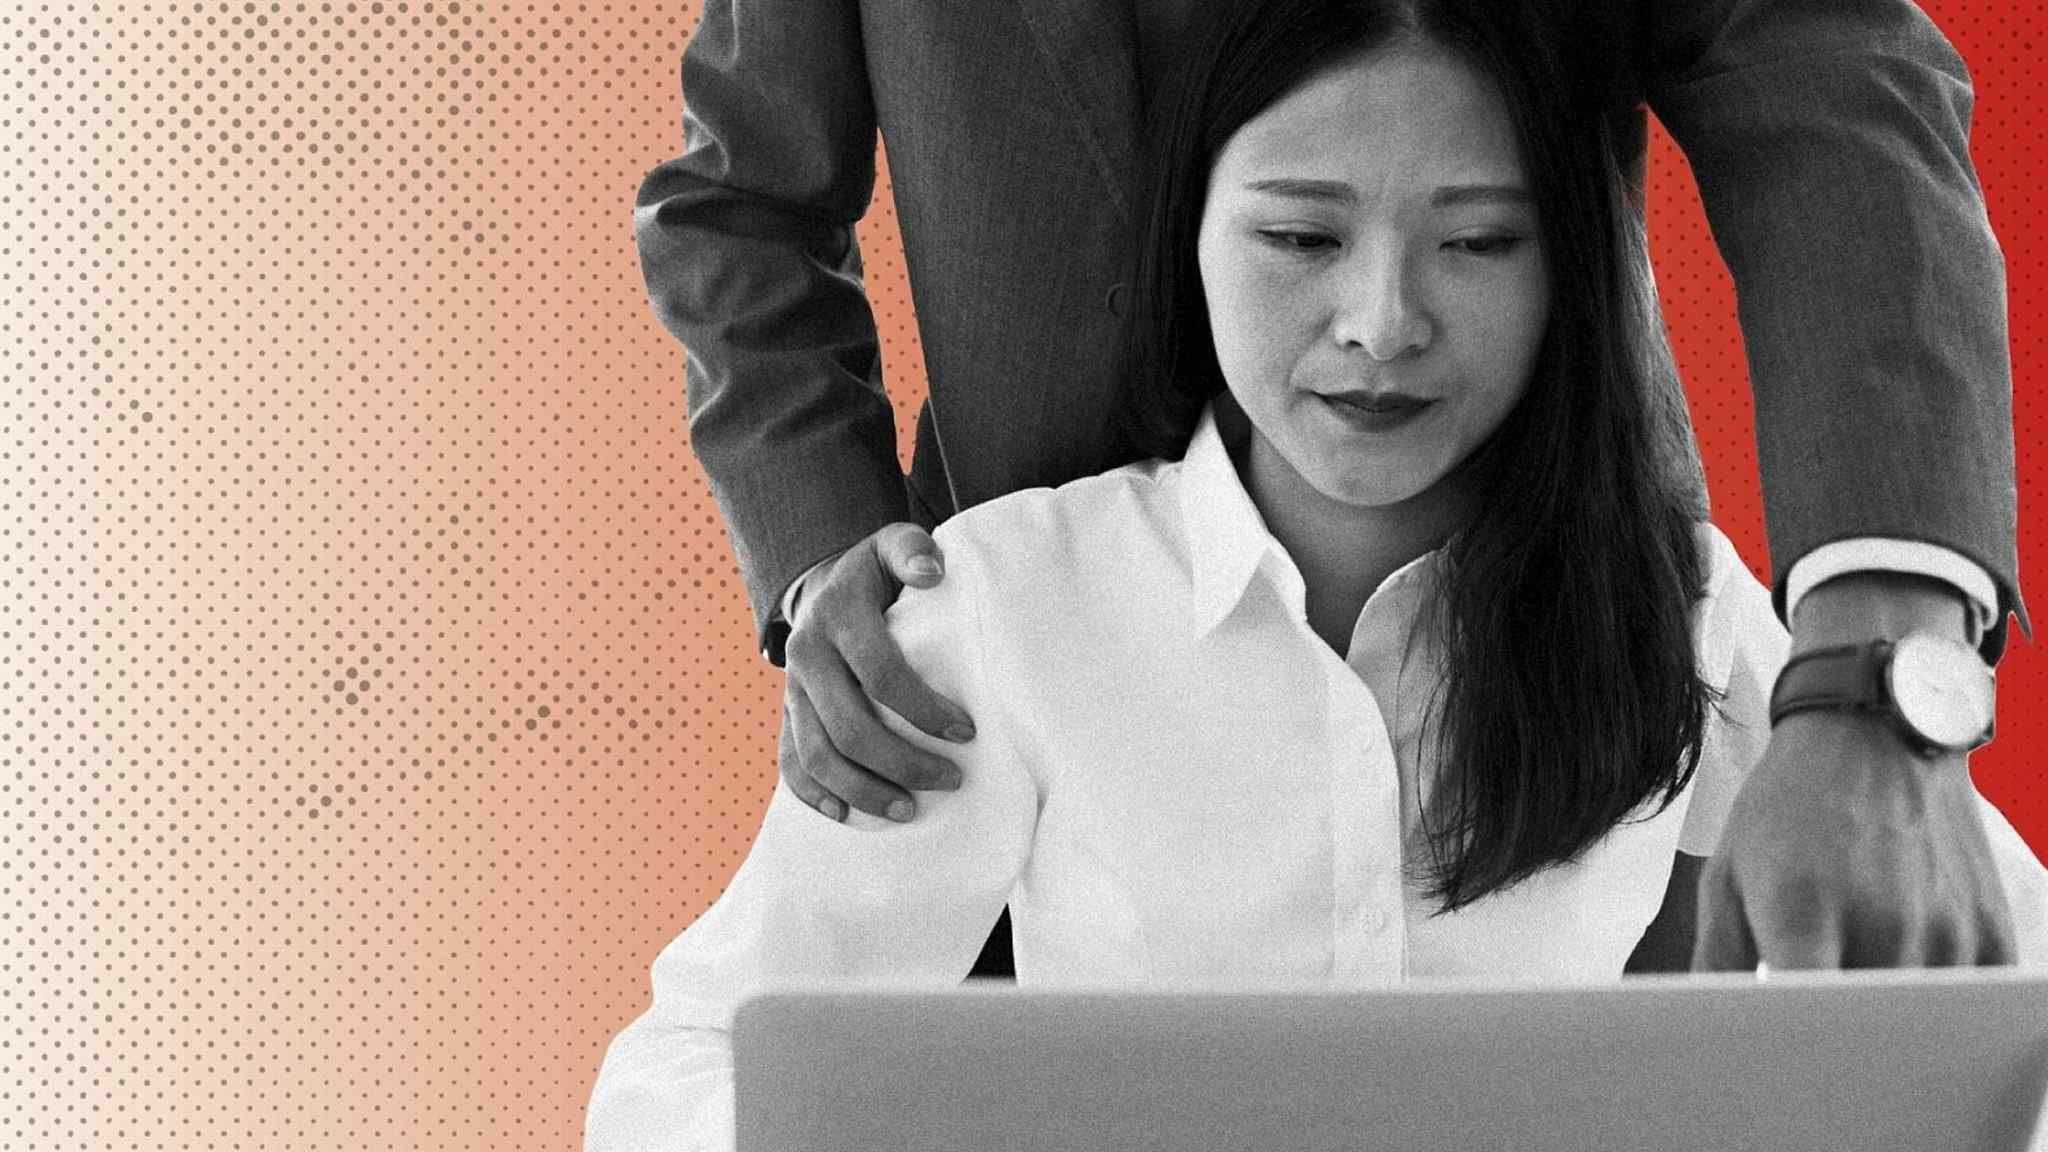 It’s not always the perpetrator who pays for sexual harassment at work